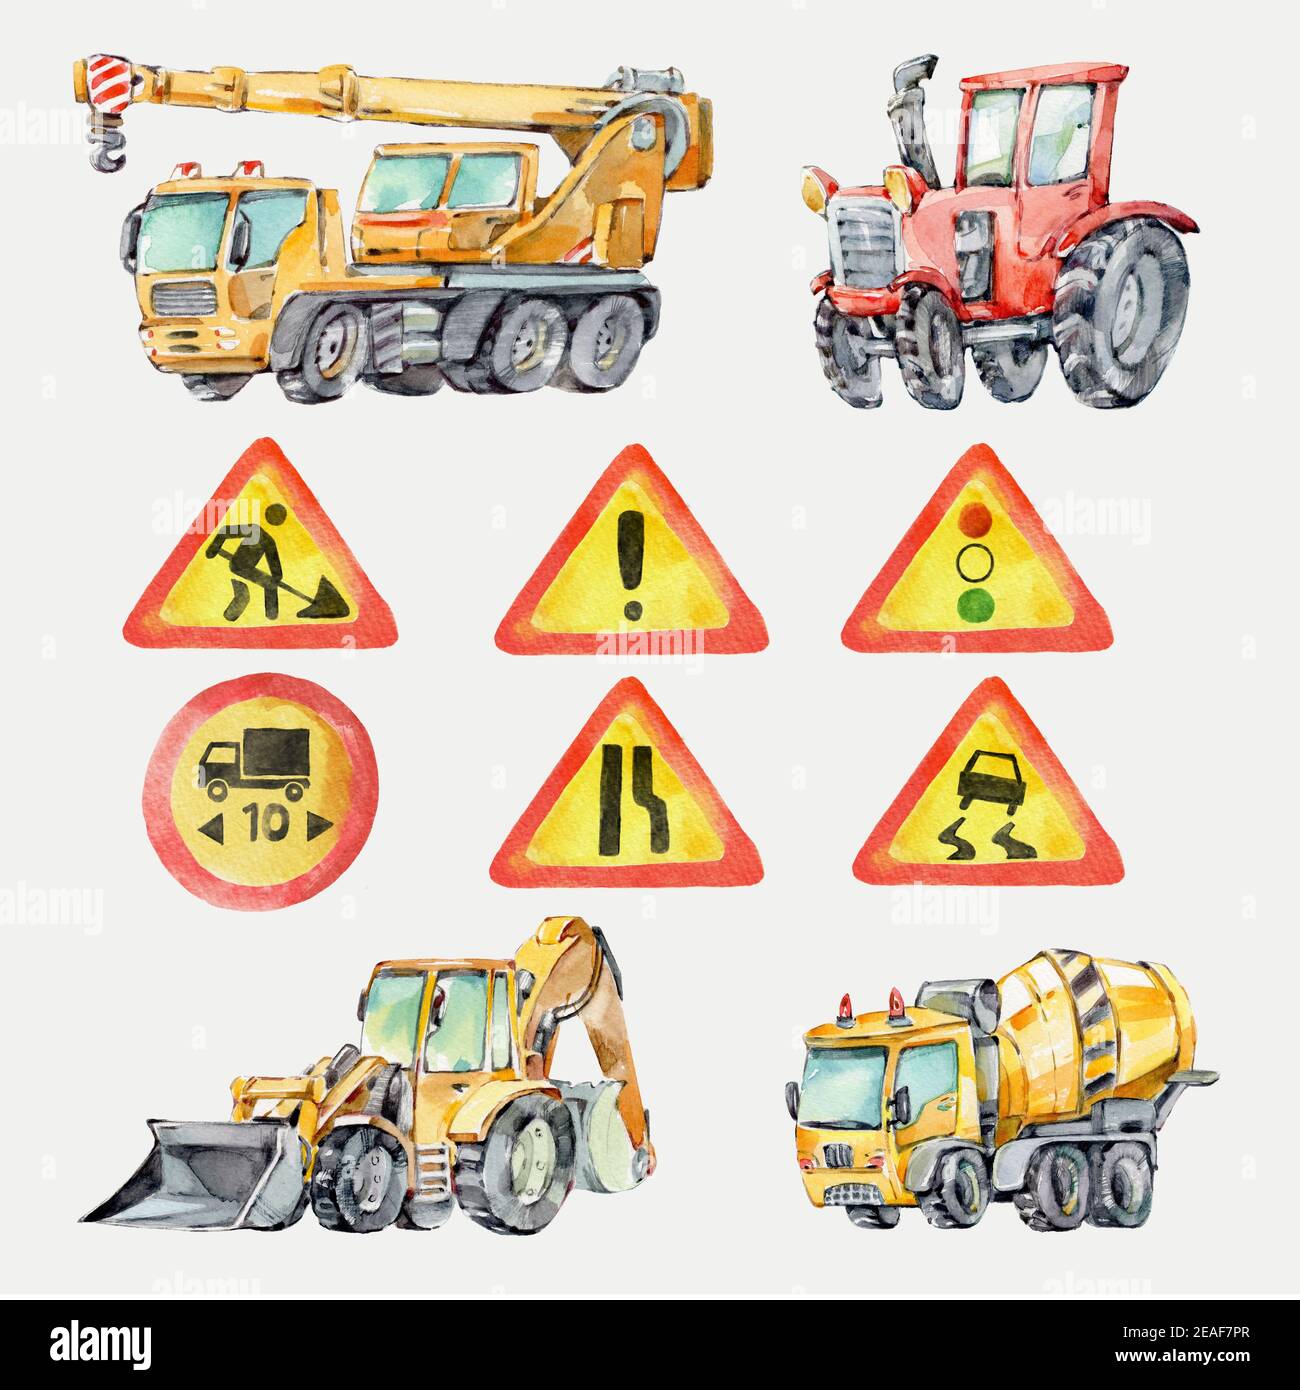 Watercolor colorful little toy Trucks, Cars and Road Signs. Watercolor Grunge Background for Kids. Red tractor, Excavator, Digger machine, Building Stock Photo